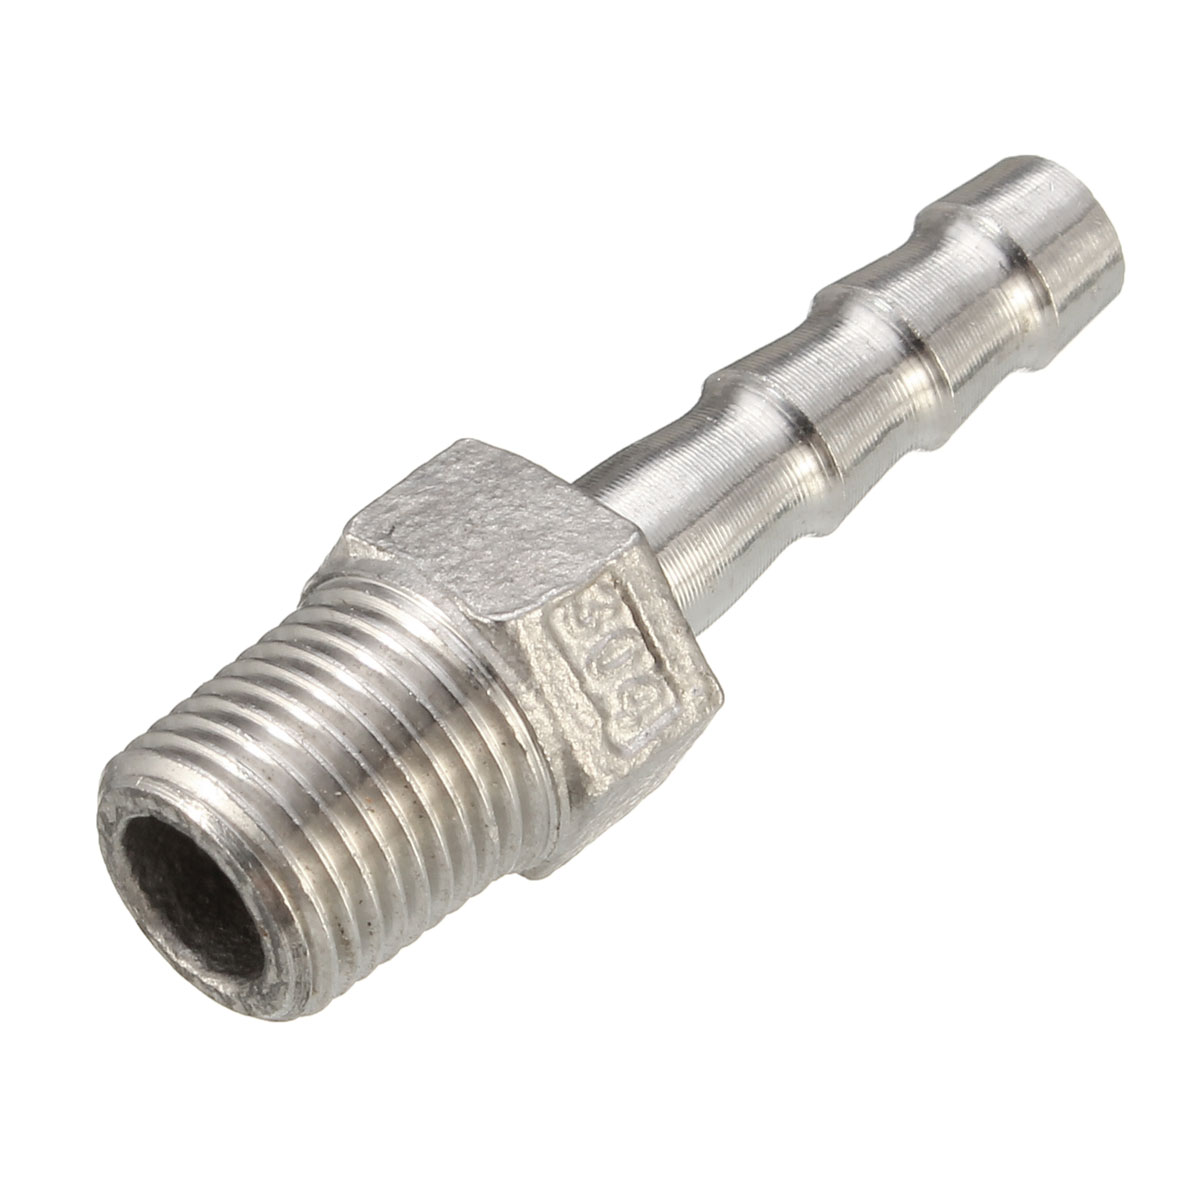 18-Inch-Stainless-Steel-Hose-Tails-Barb-Connector-BSPT-Thread-Pipe-Adapter-1716150-4